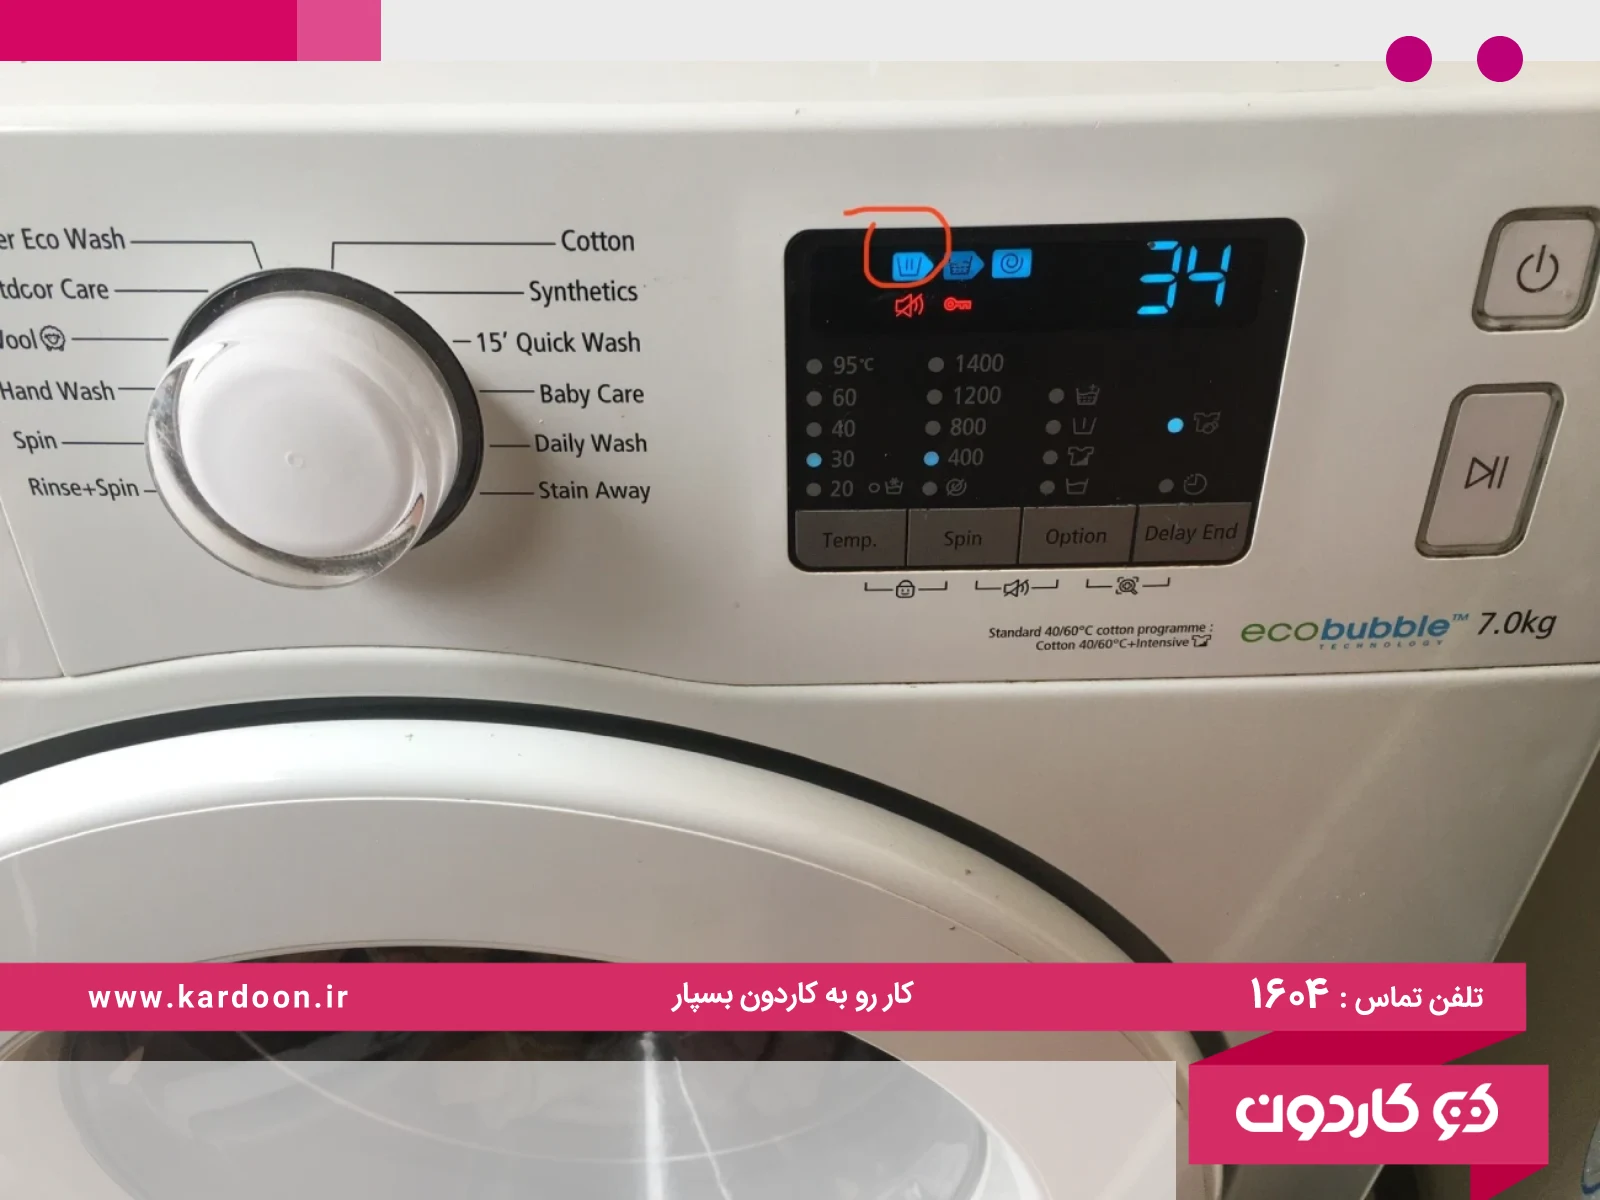 Types of signs on the washing machine